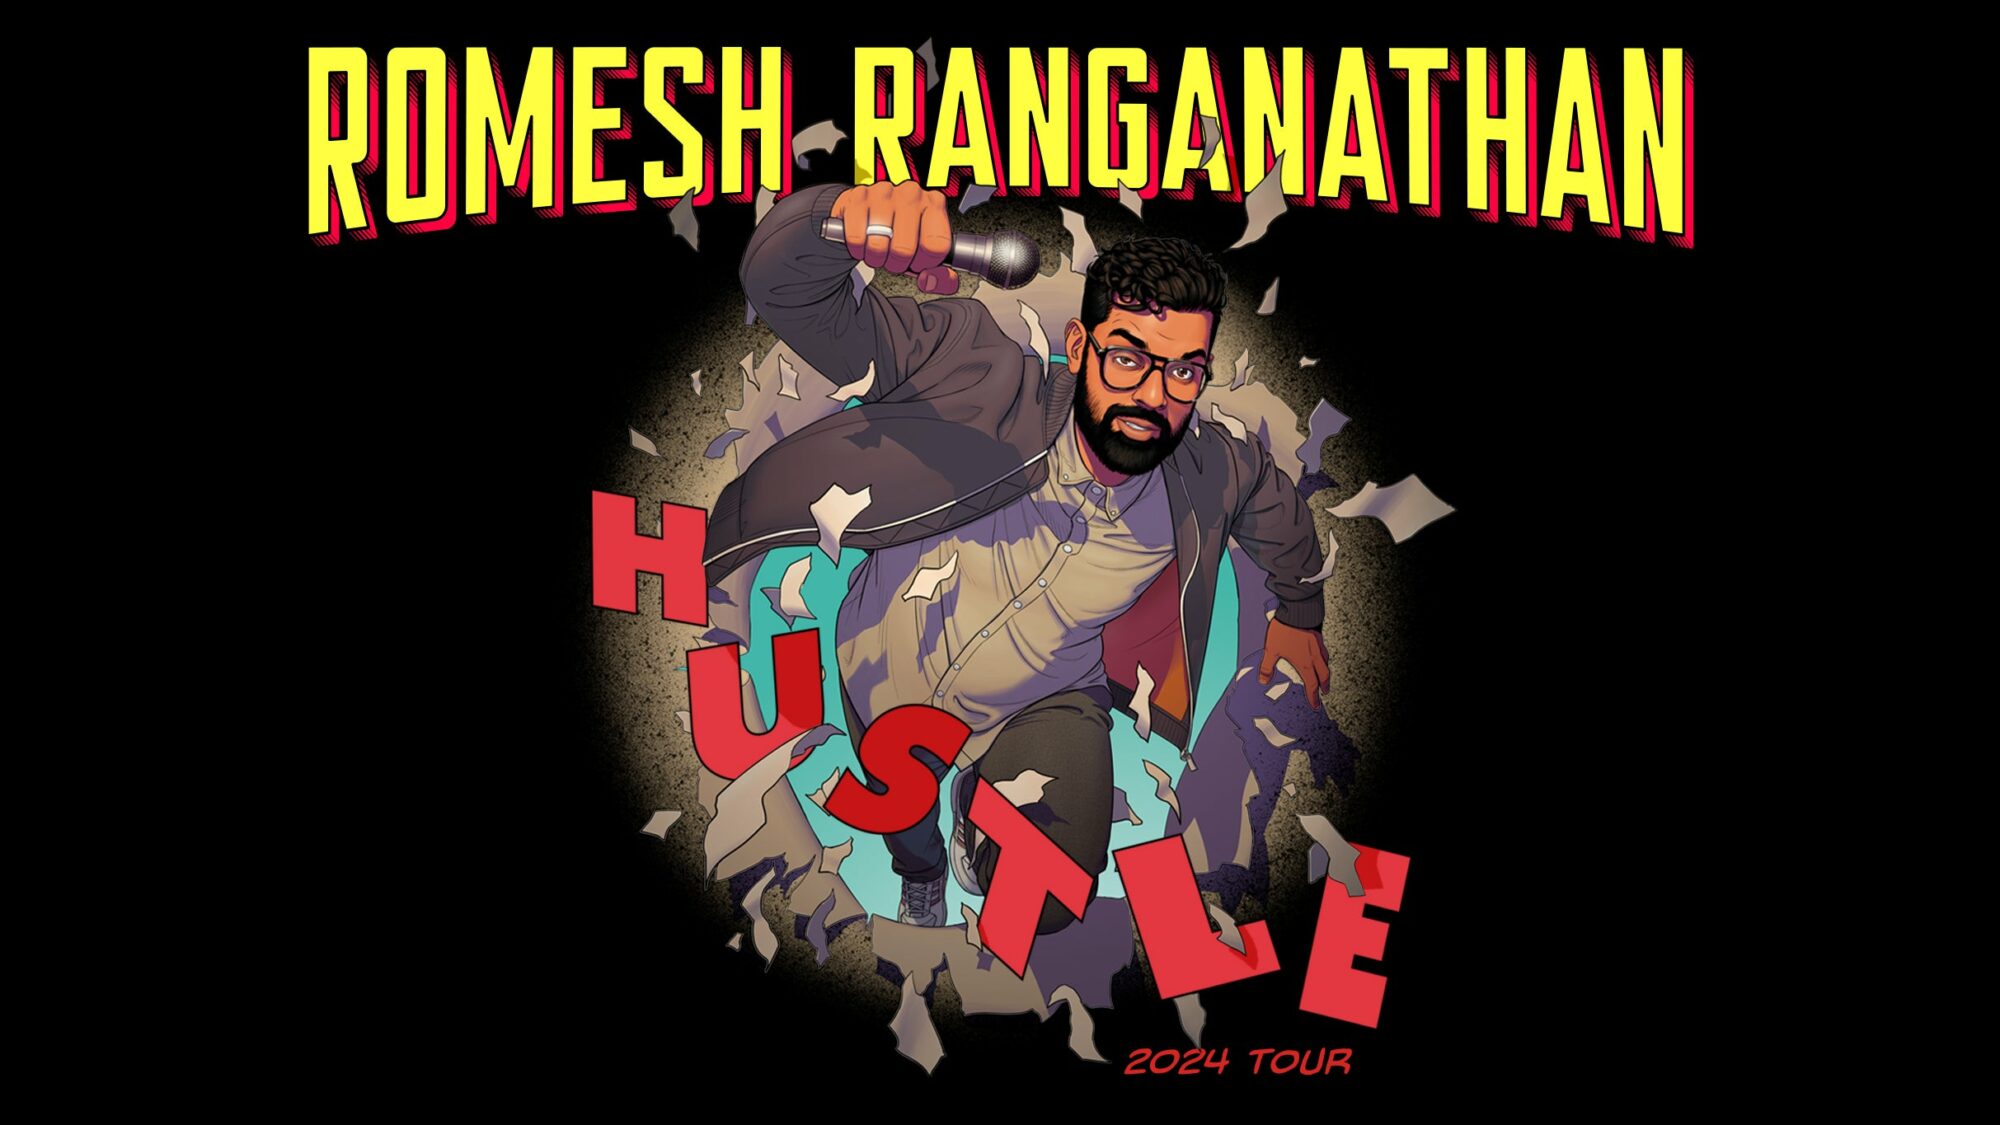 Image name Romesh Ranganathan at First Direct Arena Leeds the 2 image from the post Romesh Ranganathan - Premium Package - Suites at First Direct Arena, Leeds in Yorkshire.com.